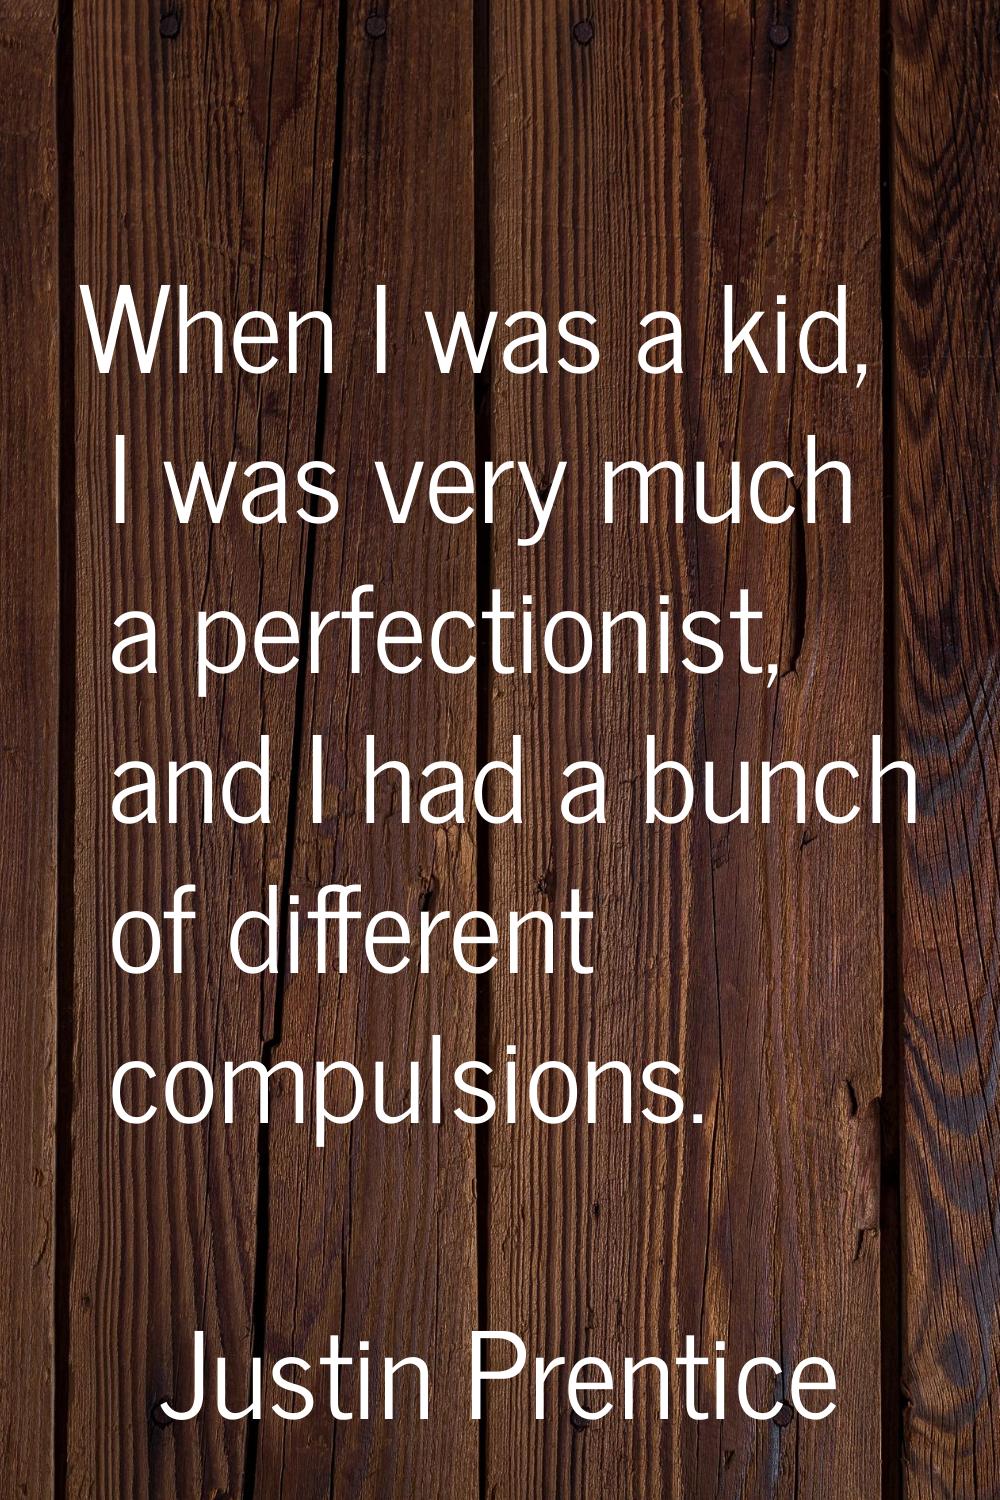 When I was a kid, I was very much a perfectionist, and I had a bunch of different compulsions.